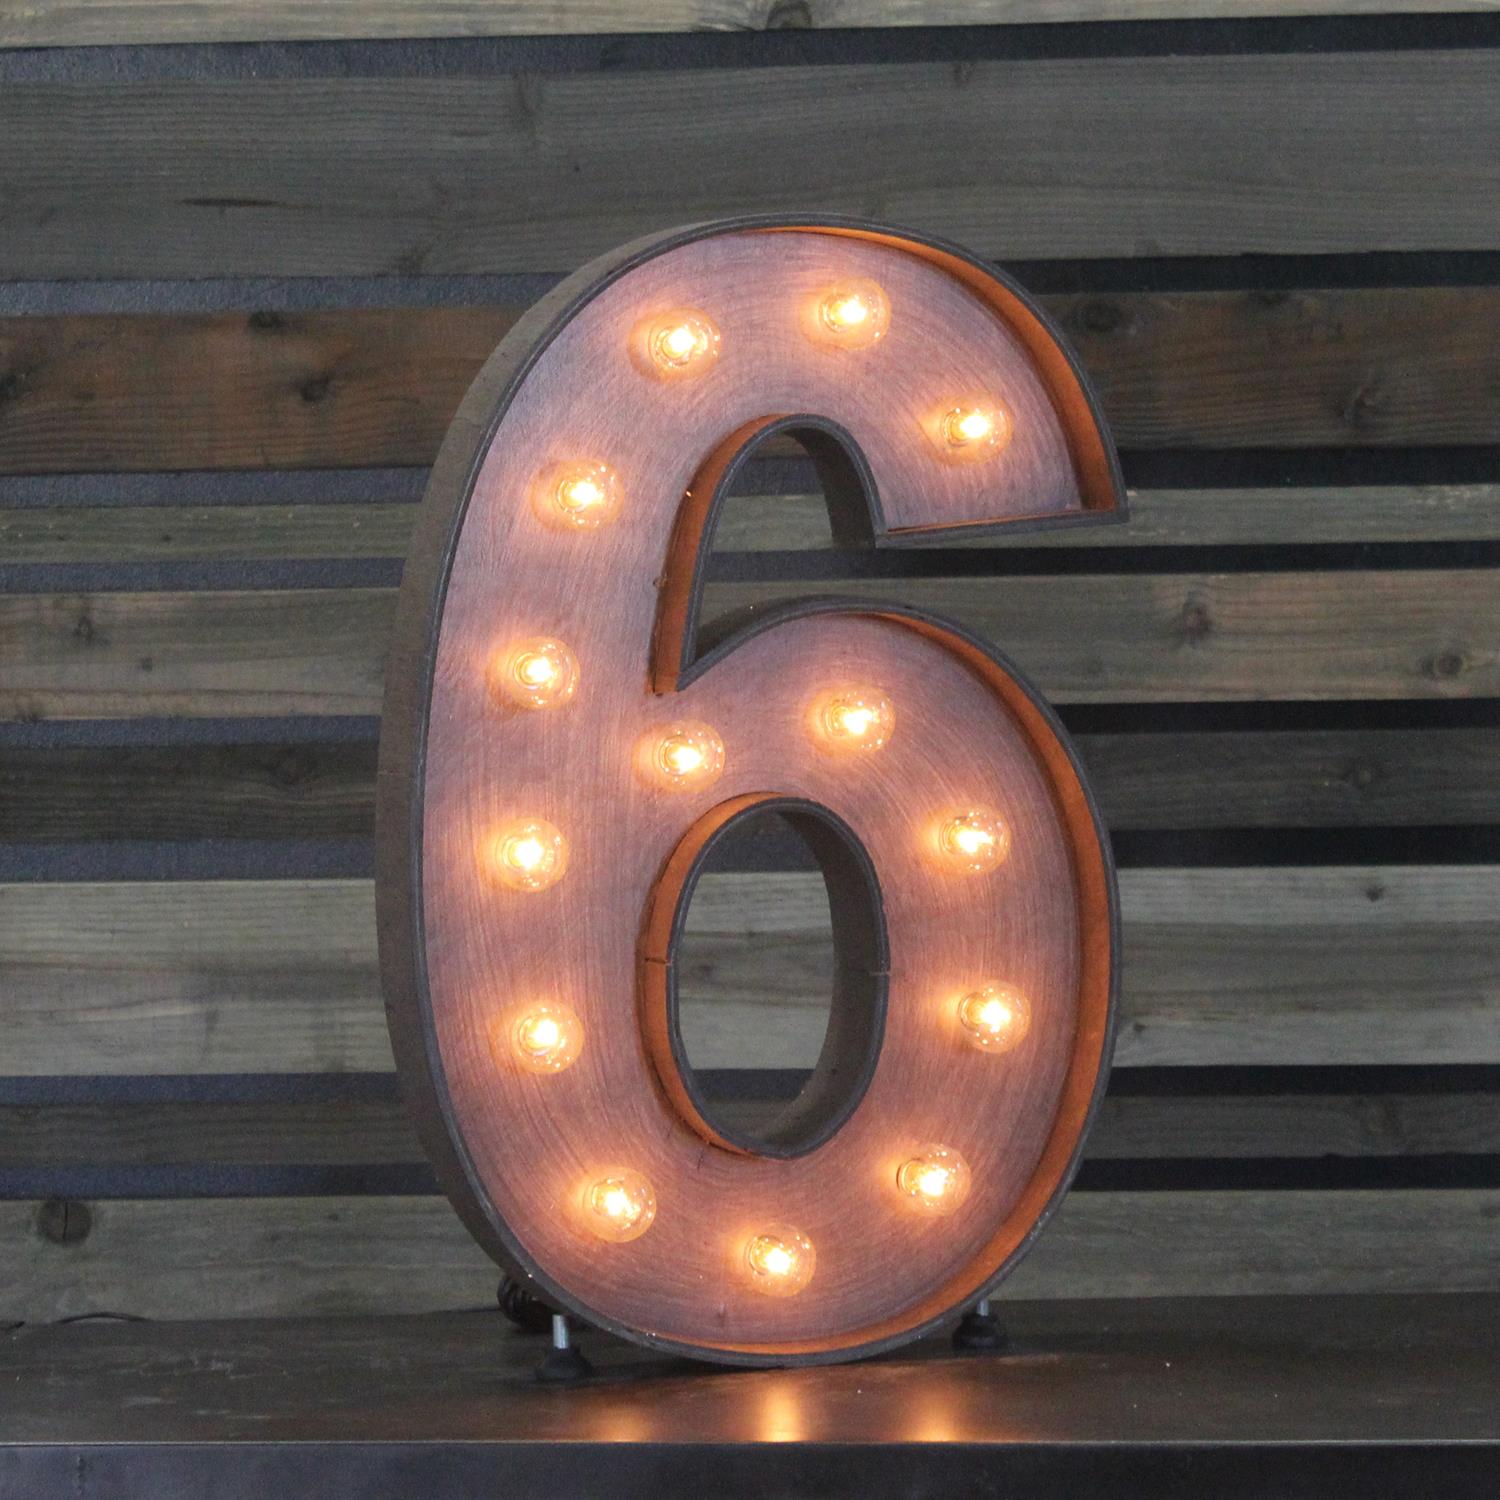 Edison Marquee Number - "6" | Town & Country Event Rentals
